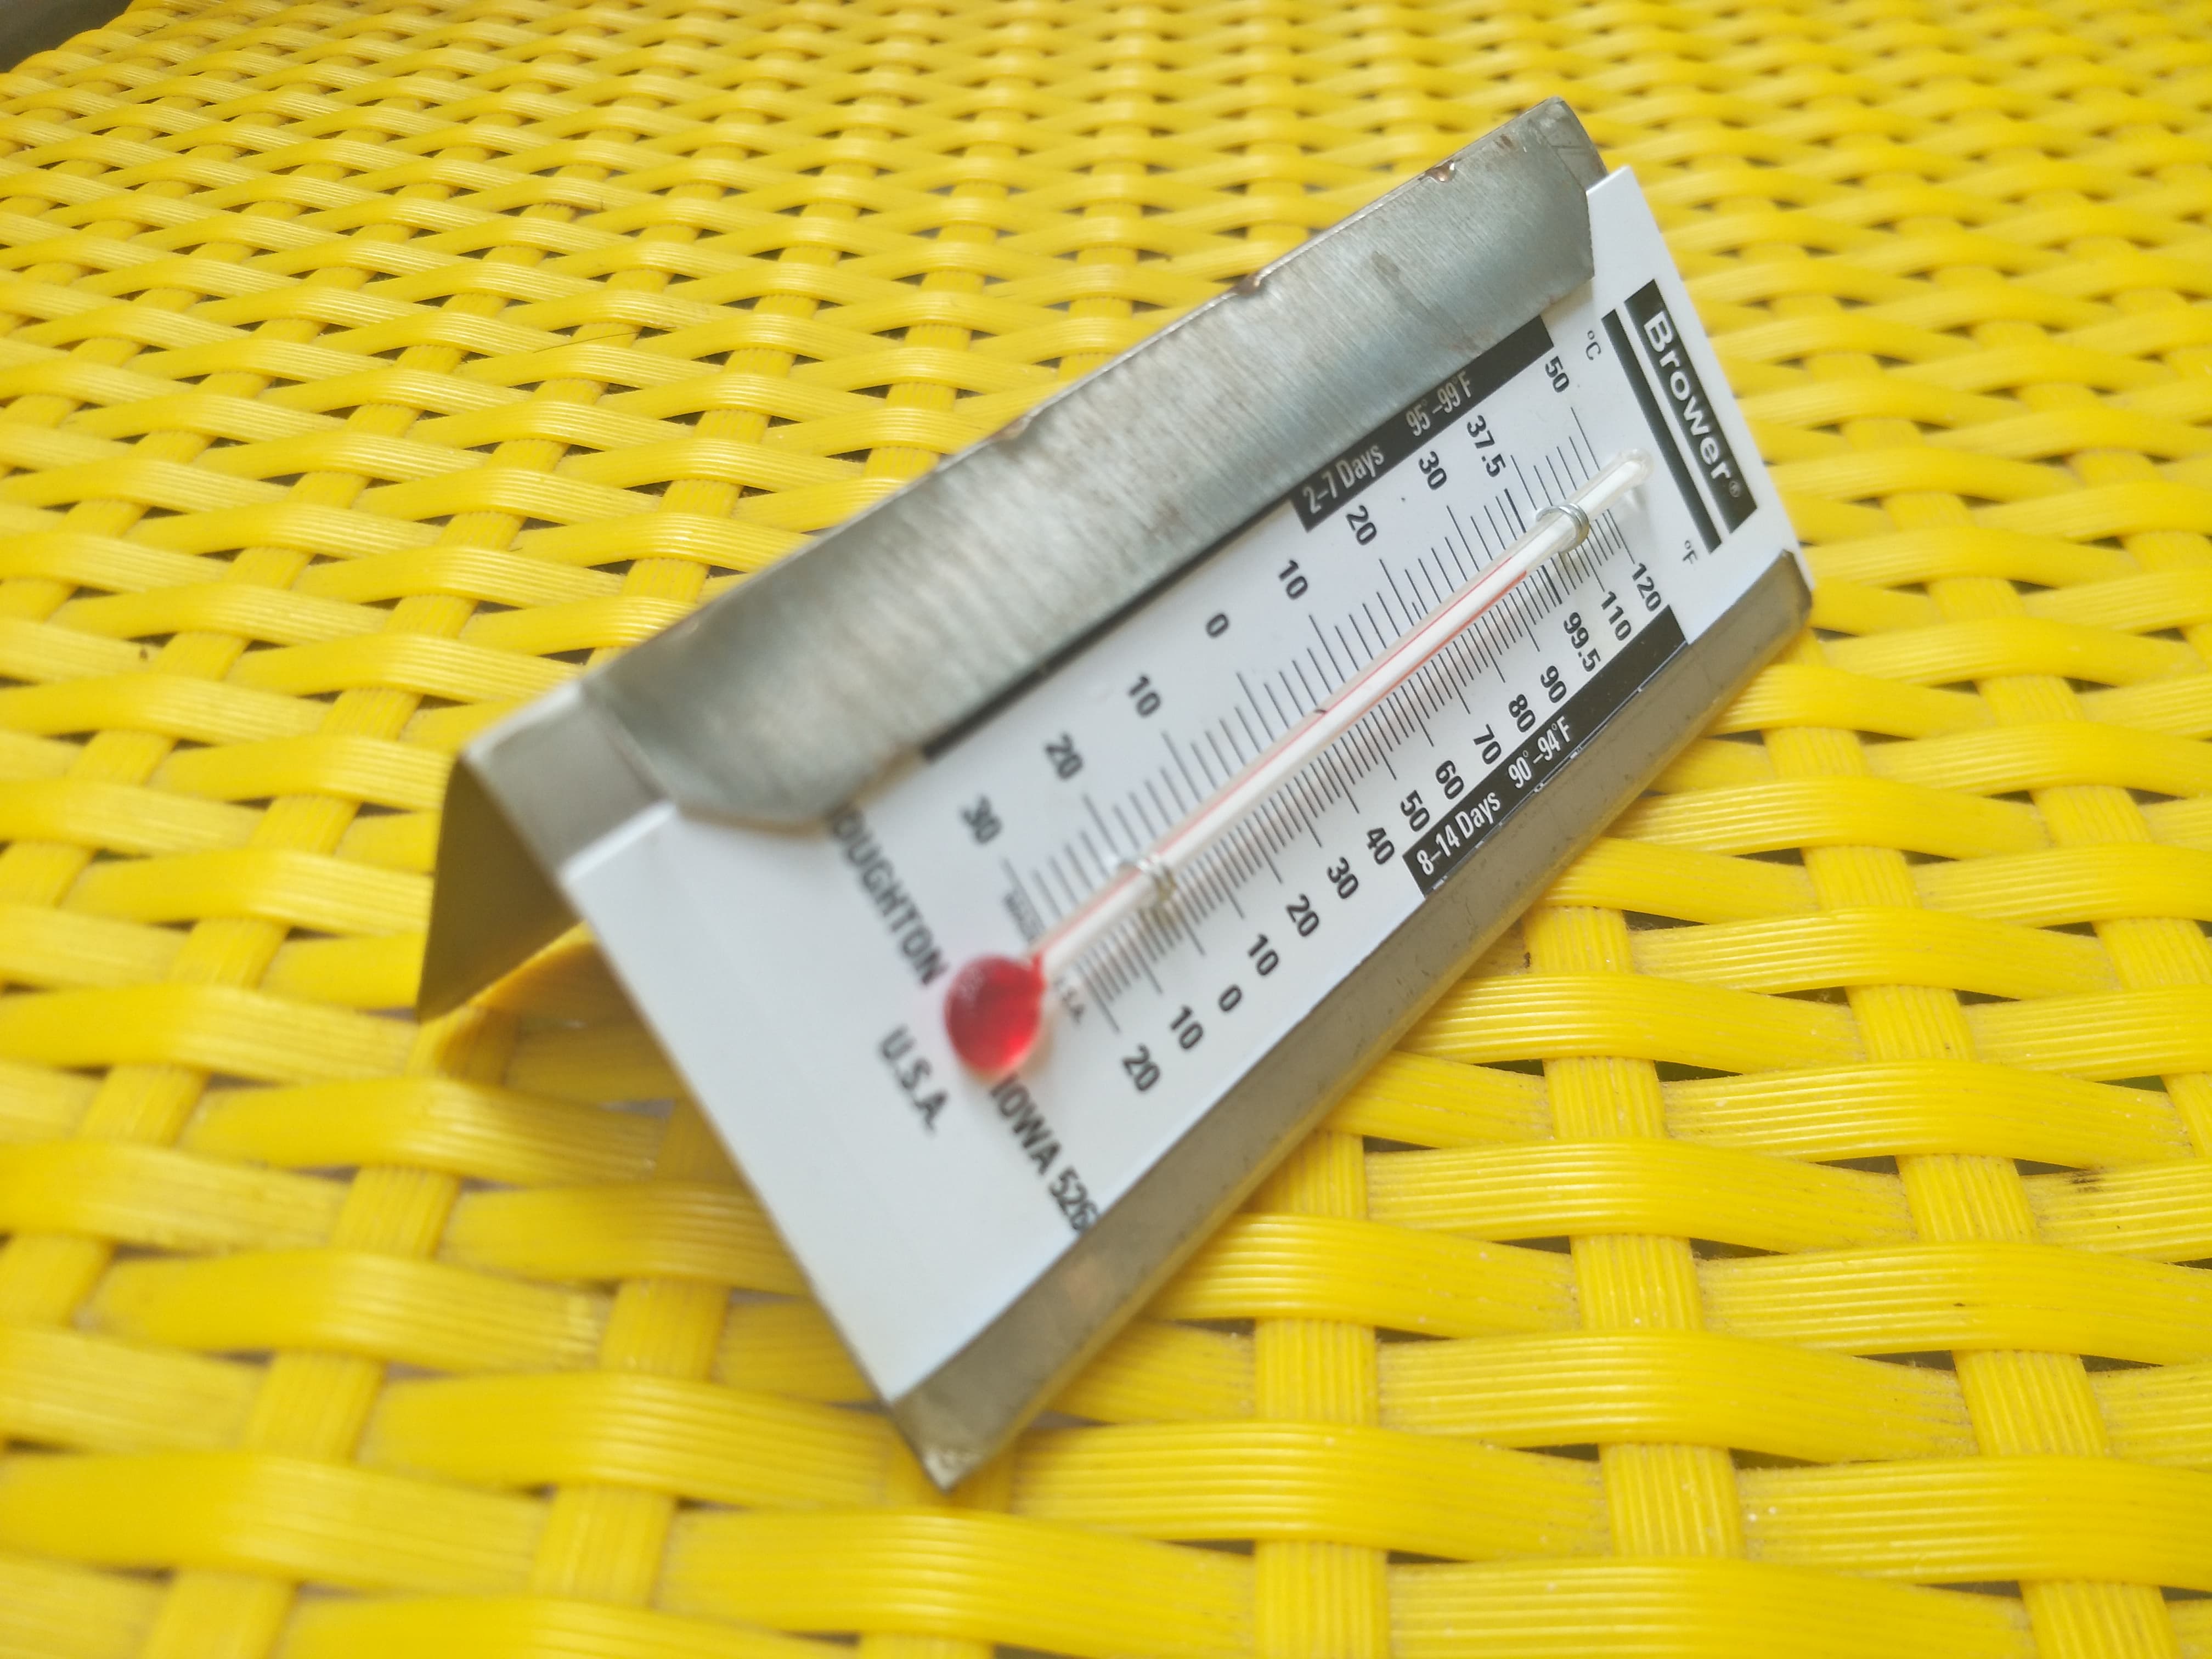 DEPARTMENT - BR INCUBATOR THERMOMETER